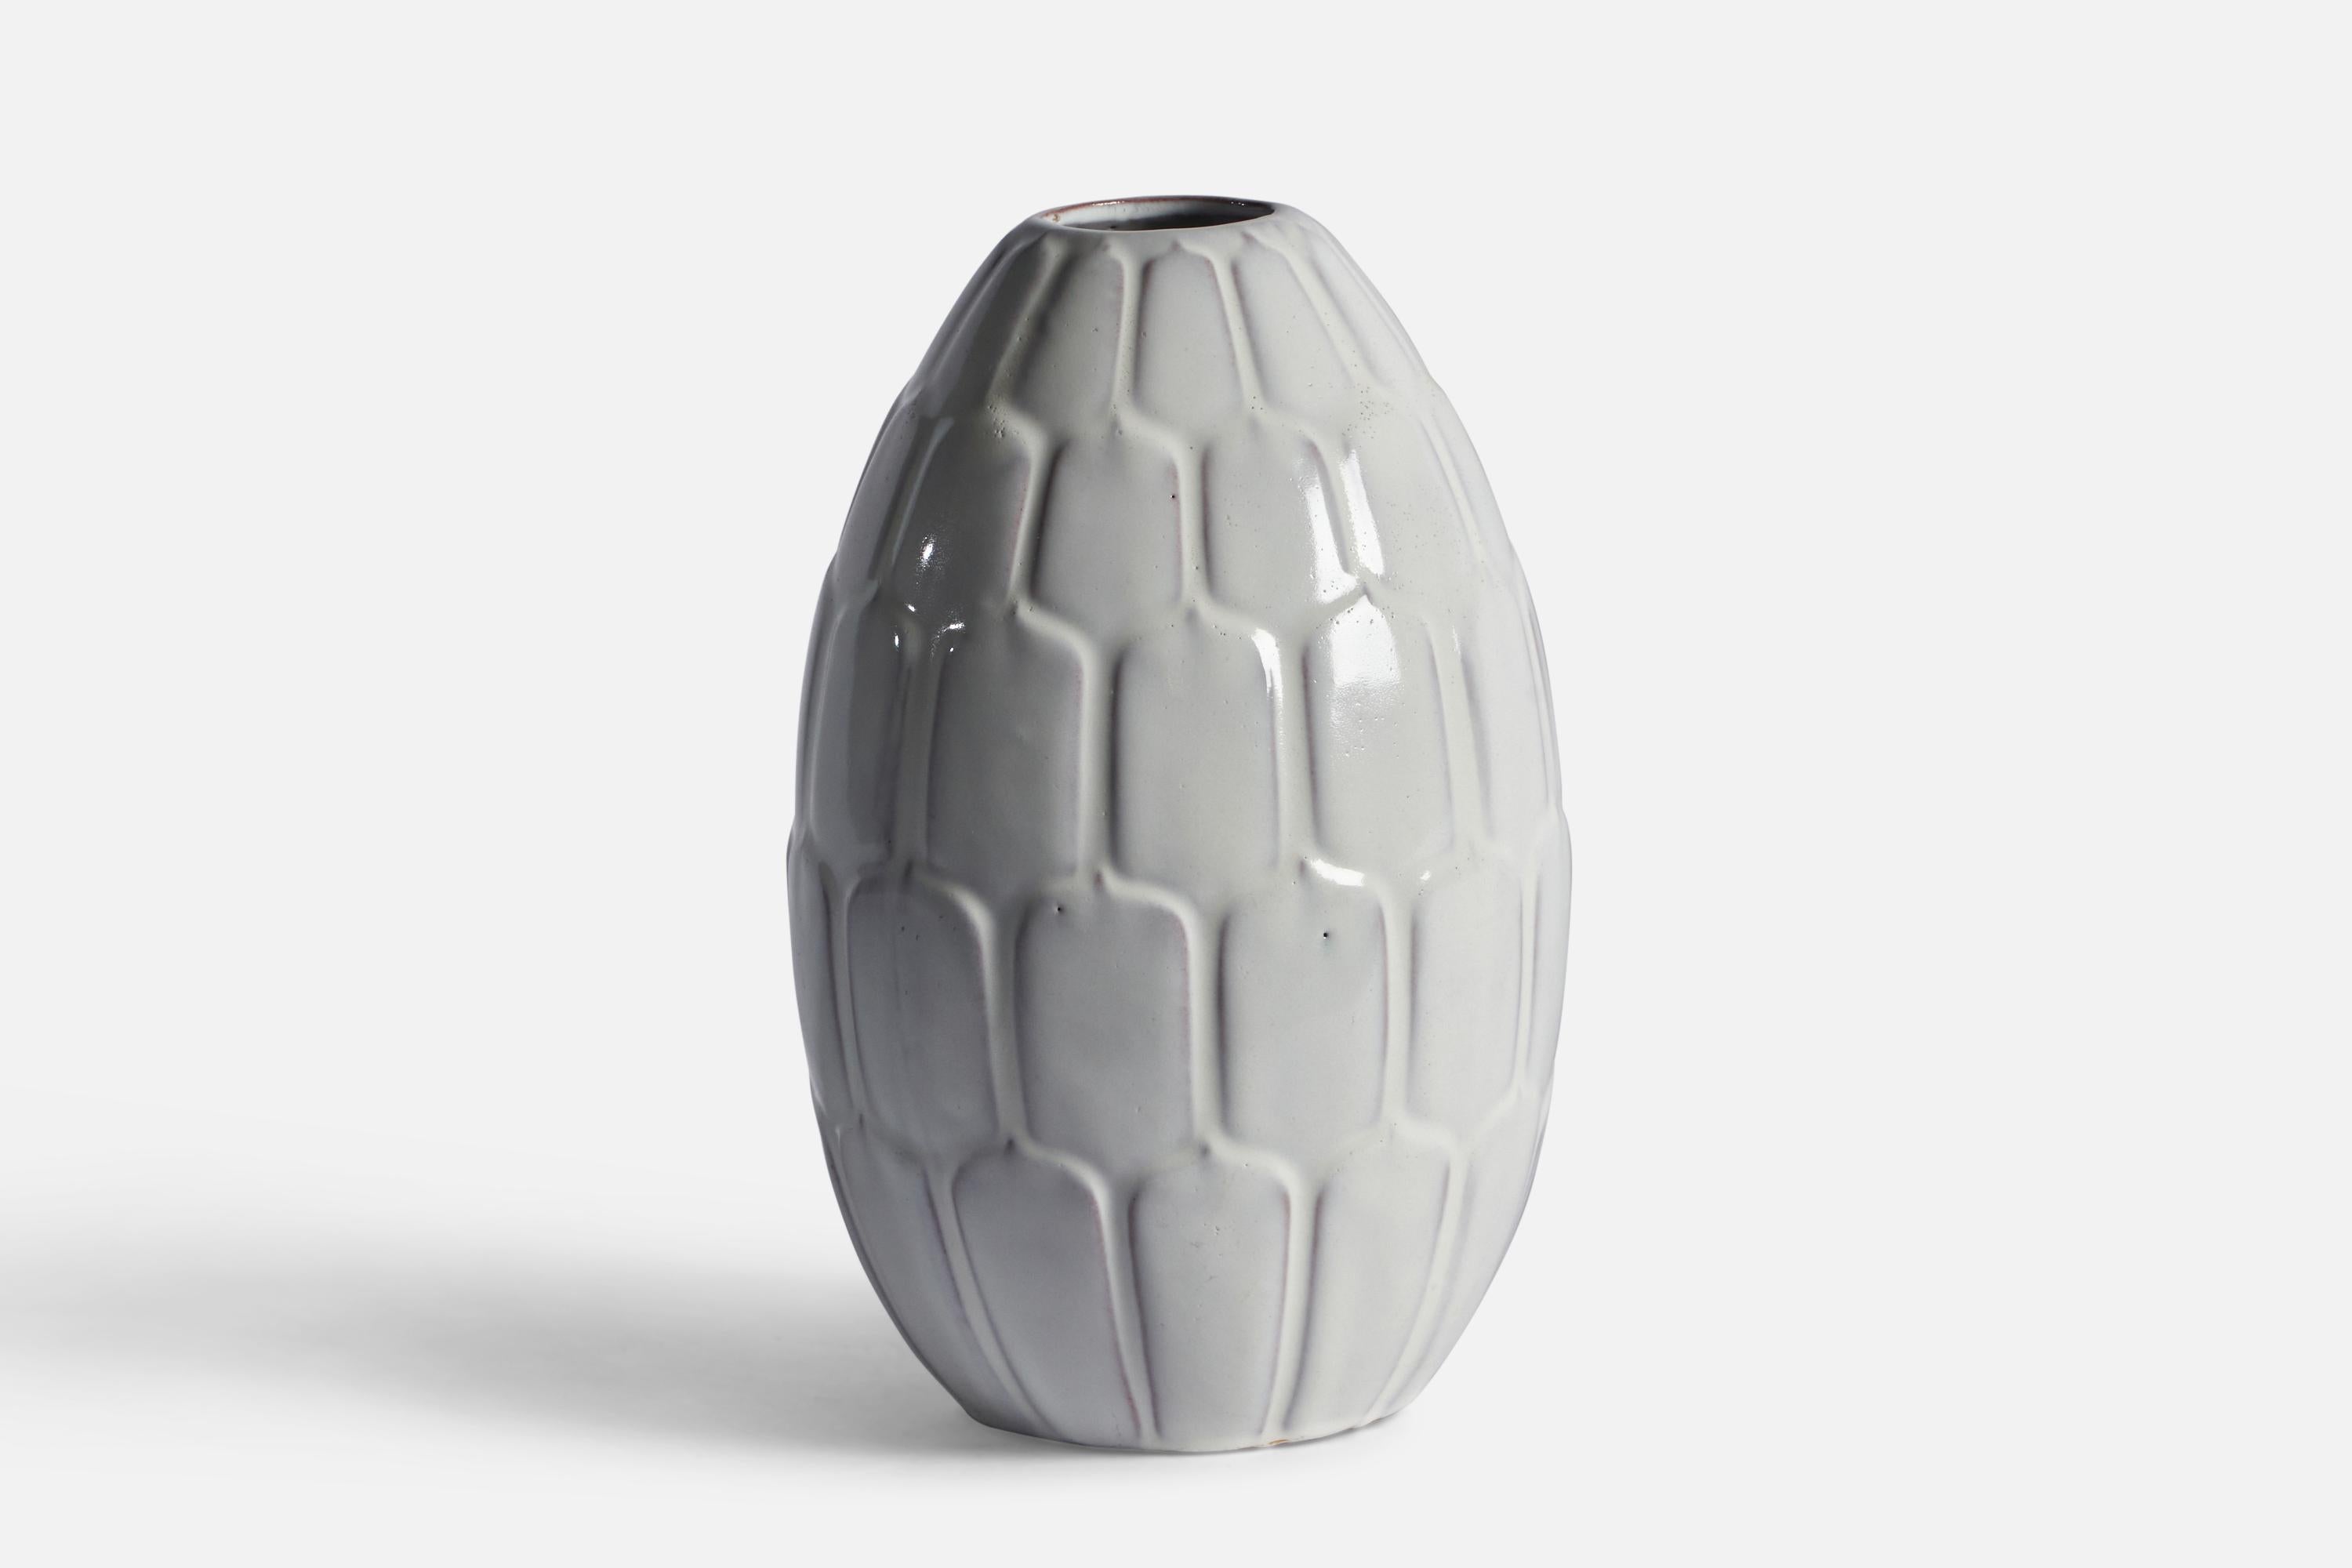 A white-glazed earthenware vase designed by Anna Lisa Thomson and produced by Upsala Ekeby, Sweden, 1940s.